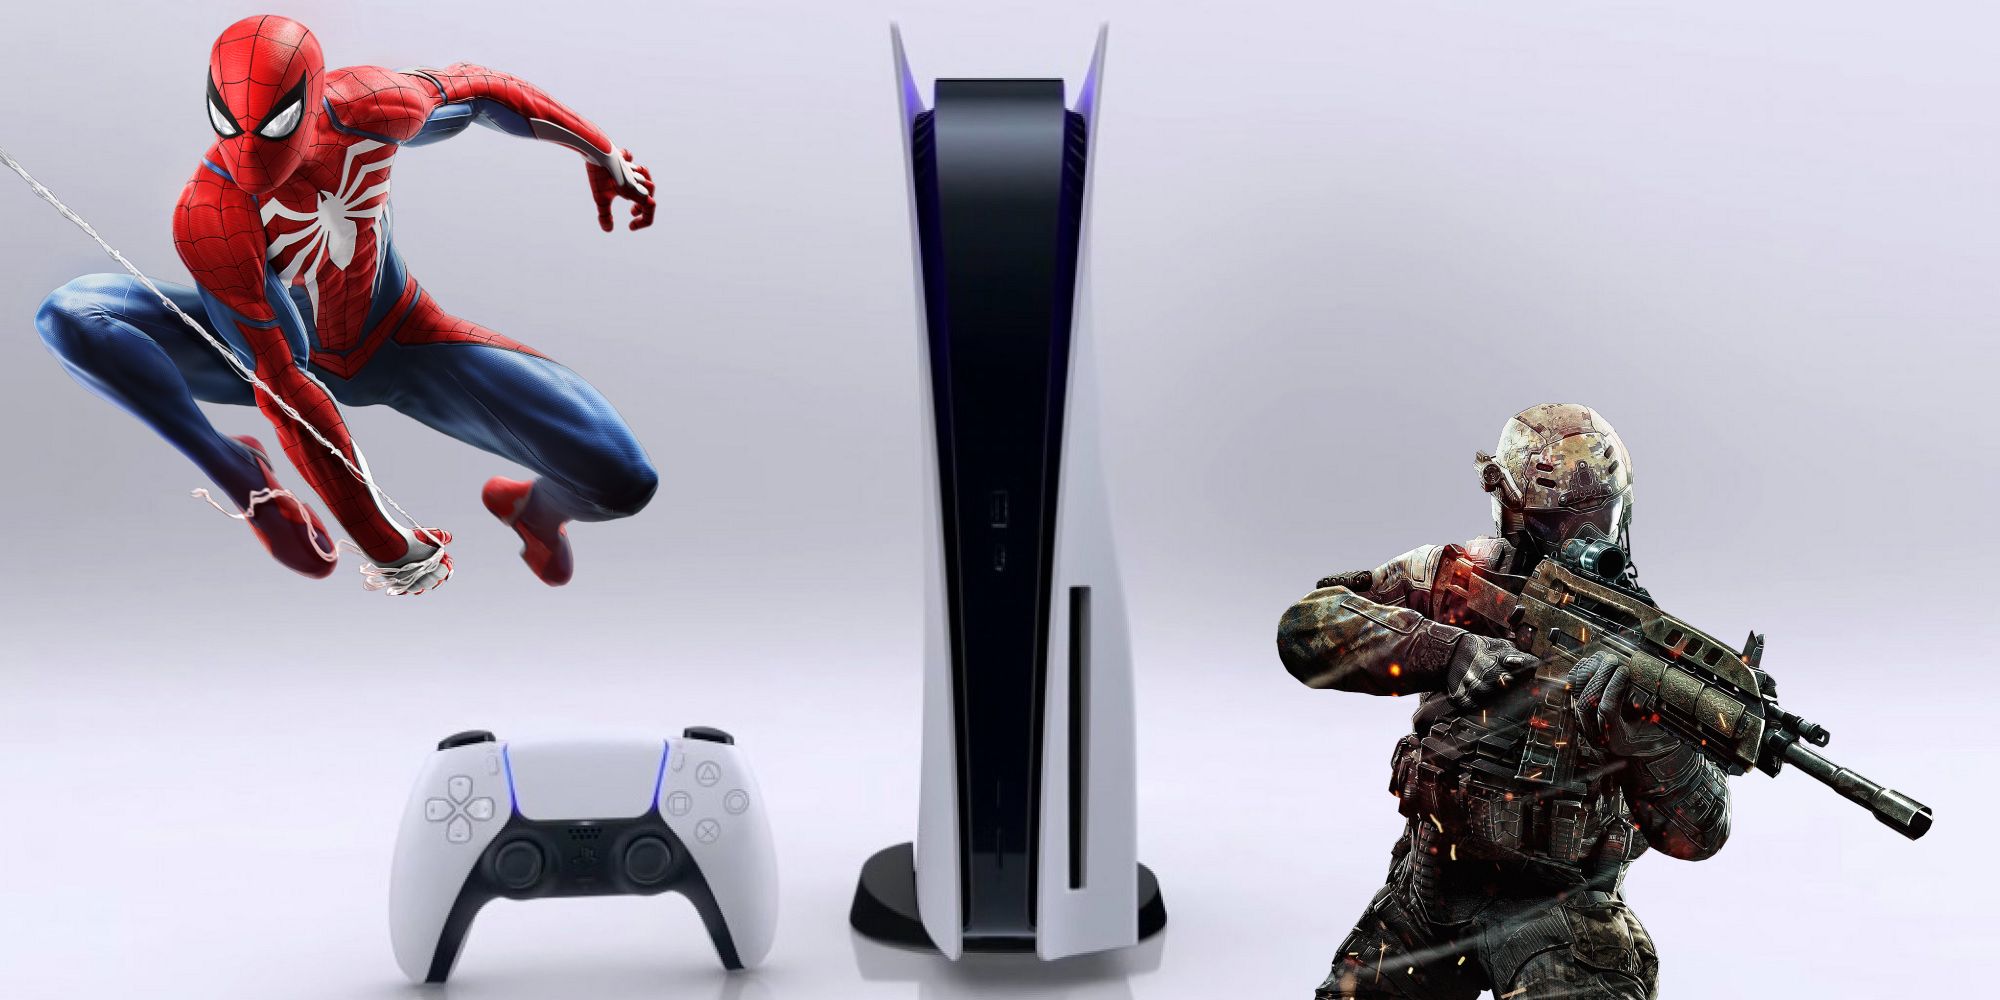 Spider-Man and Call of Duty PlayStation 5 time exclusives.